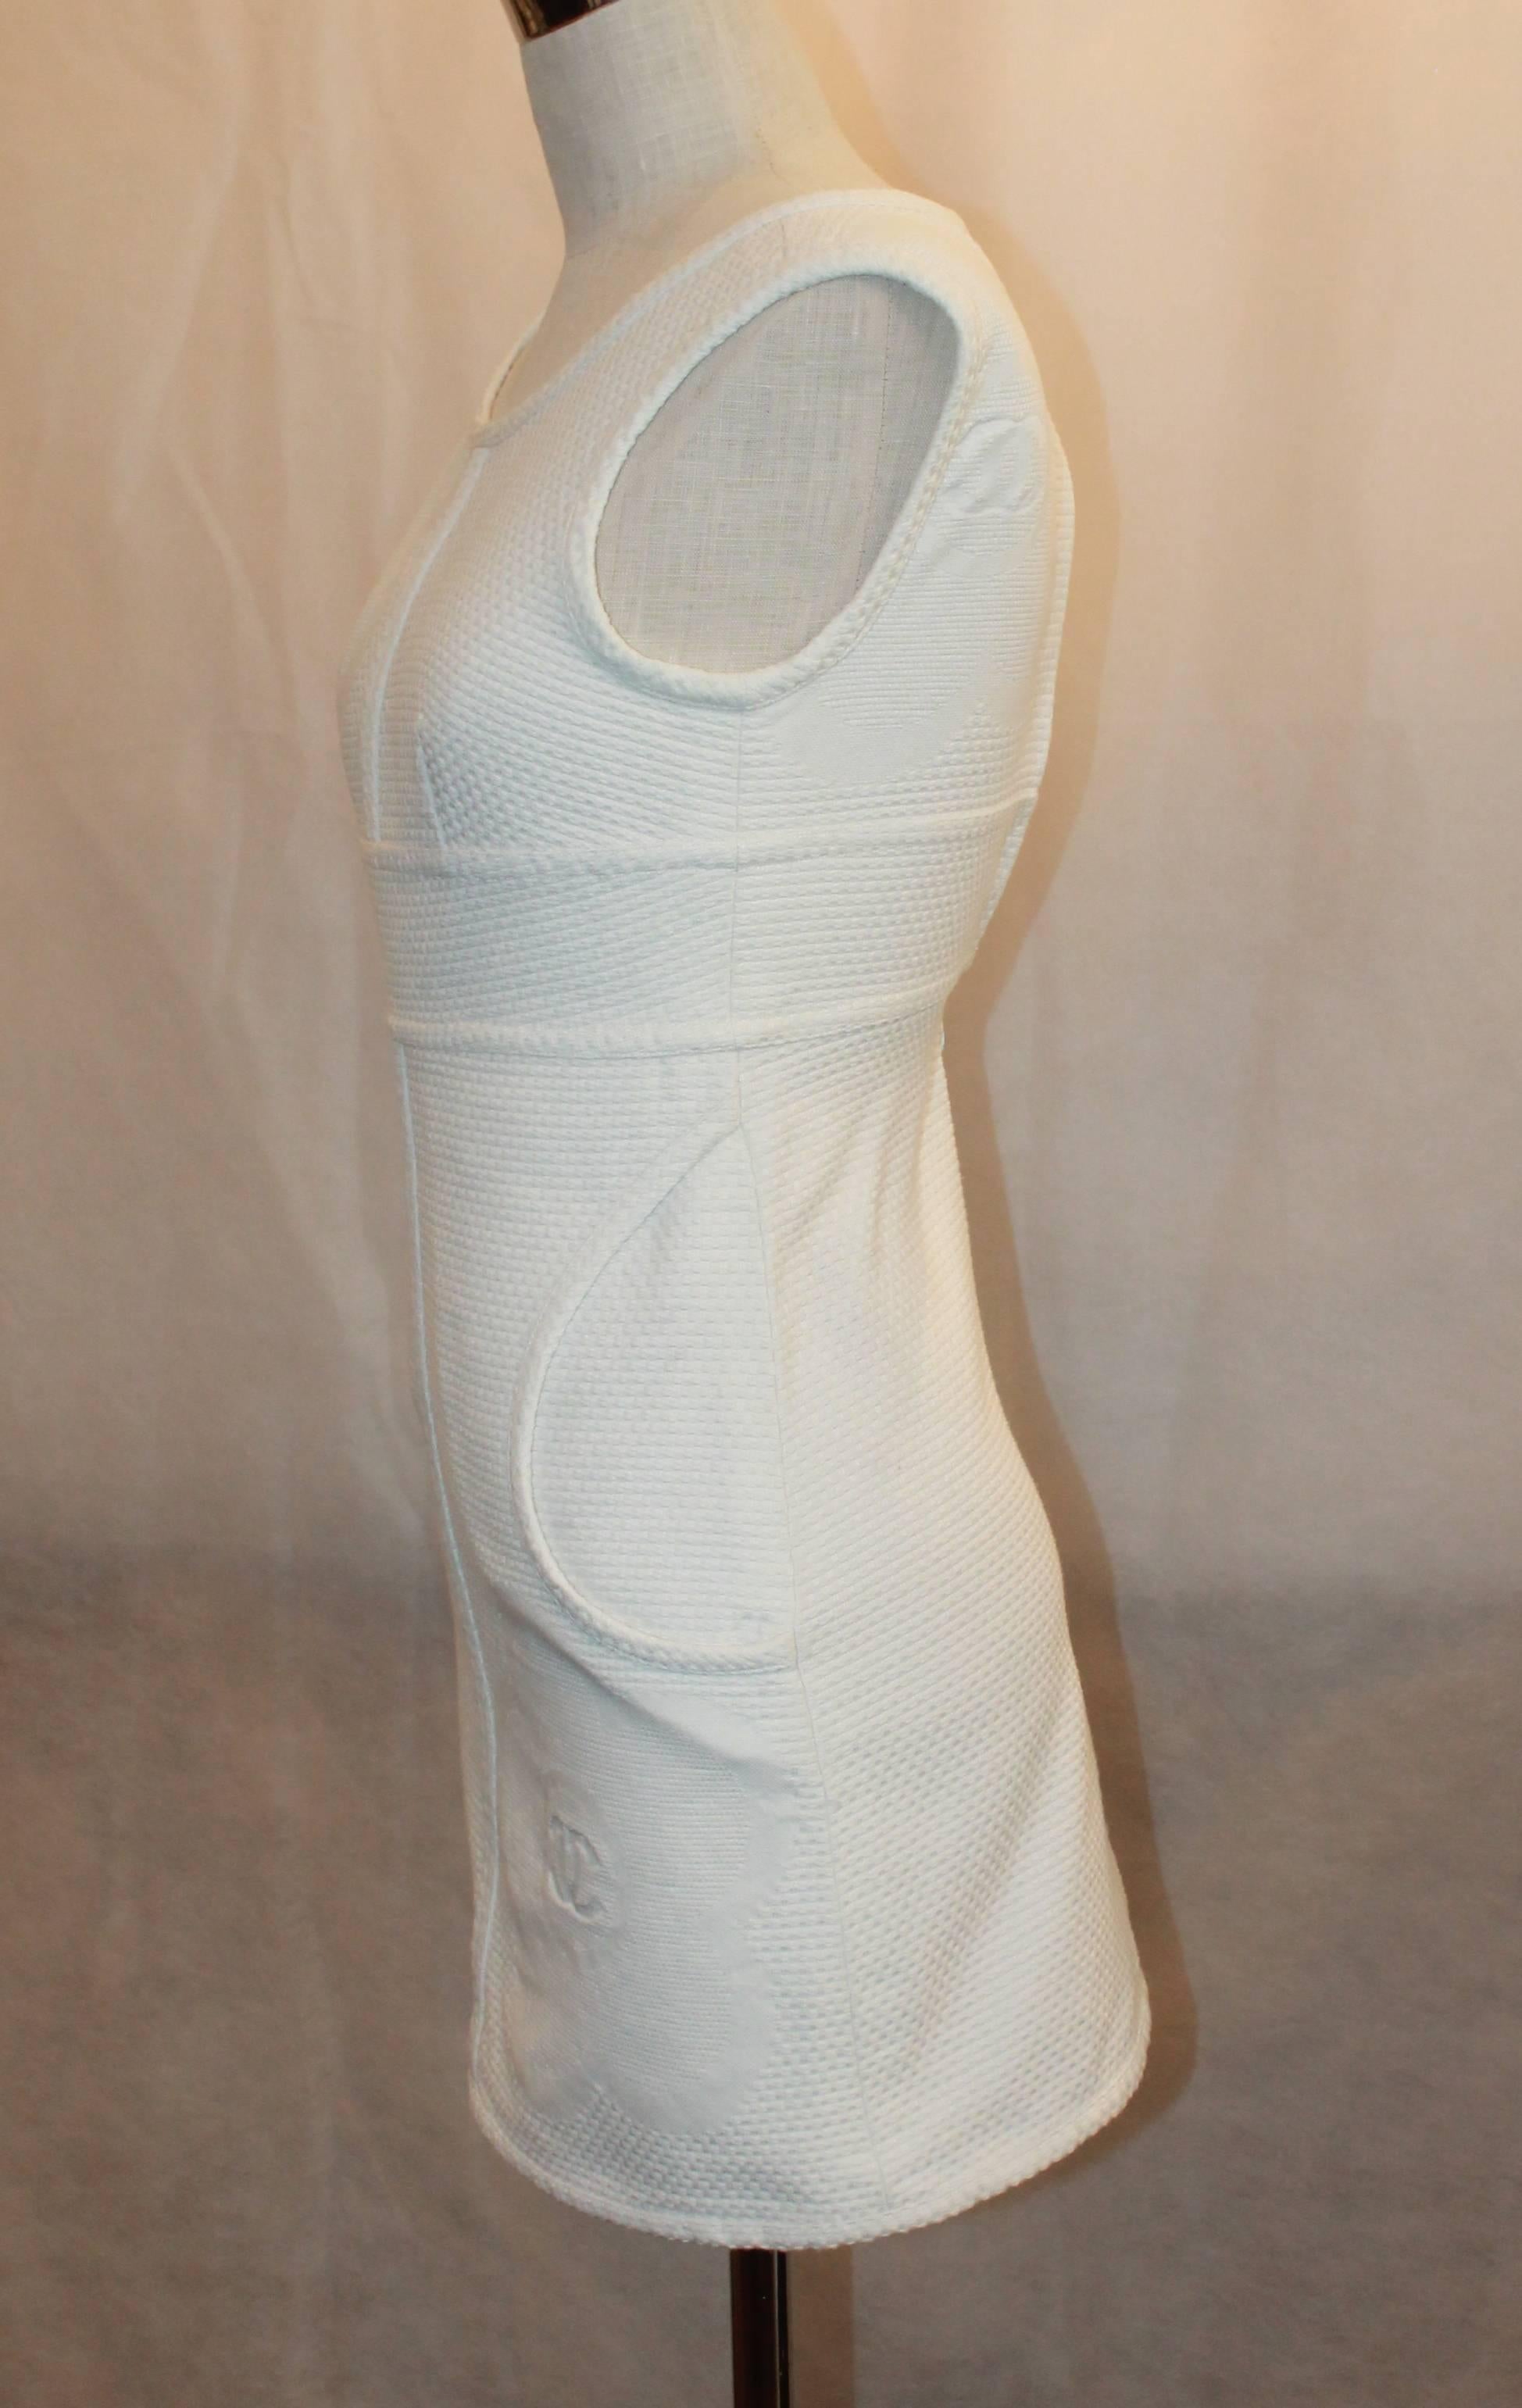 Chanel White Cotton Sleeveless Mini Dress with Pockets - 34 - 09P. This dress is in excellent condition with very little wear. The dress' fabric is textured and has a flower print on it with a 